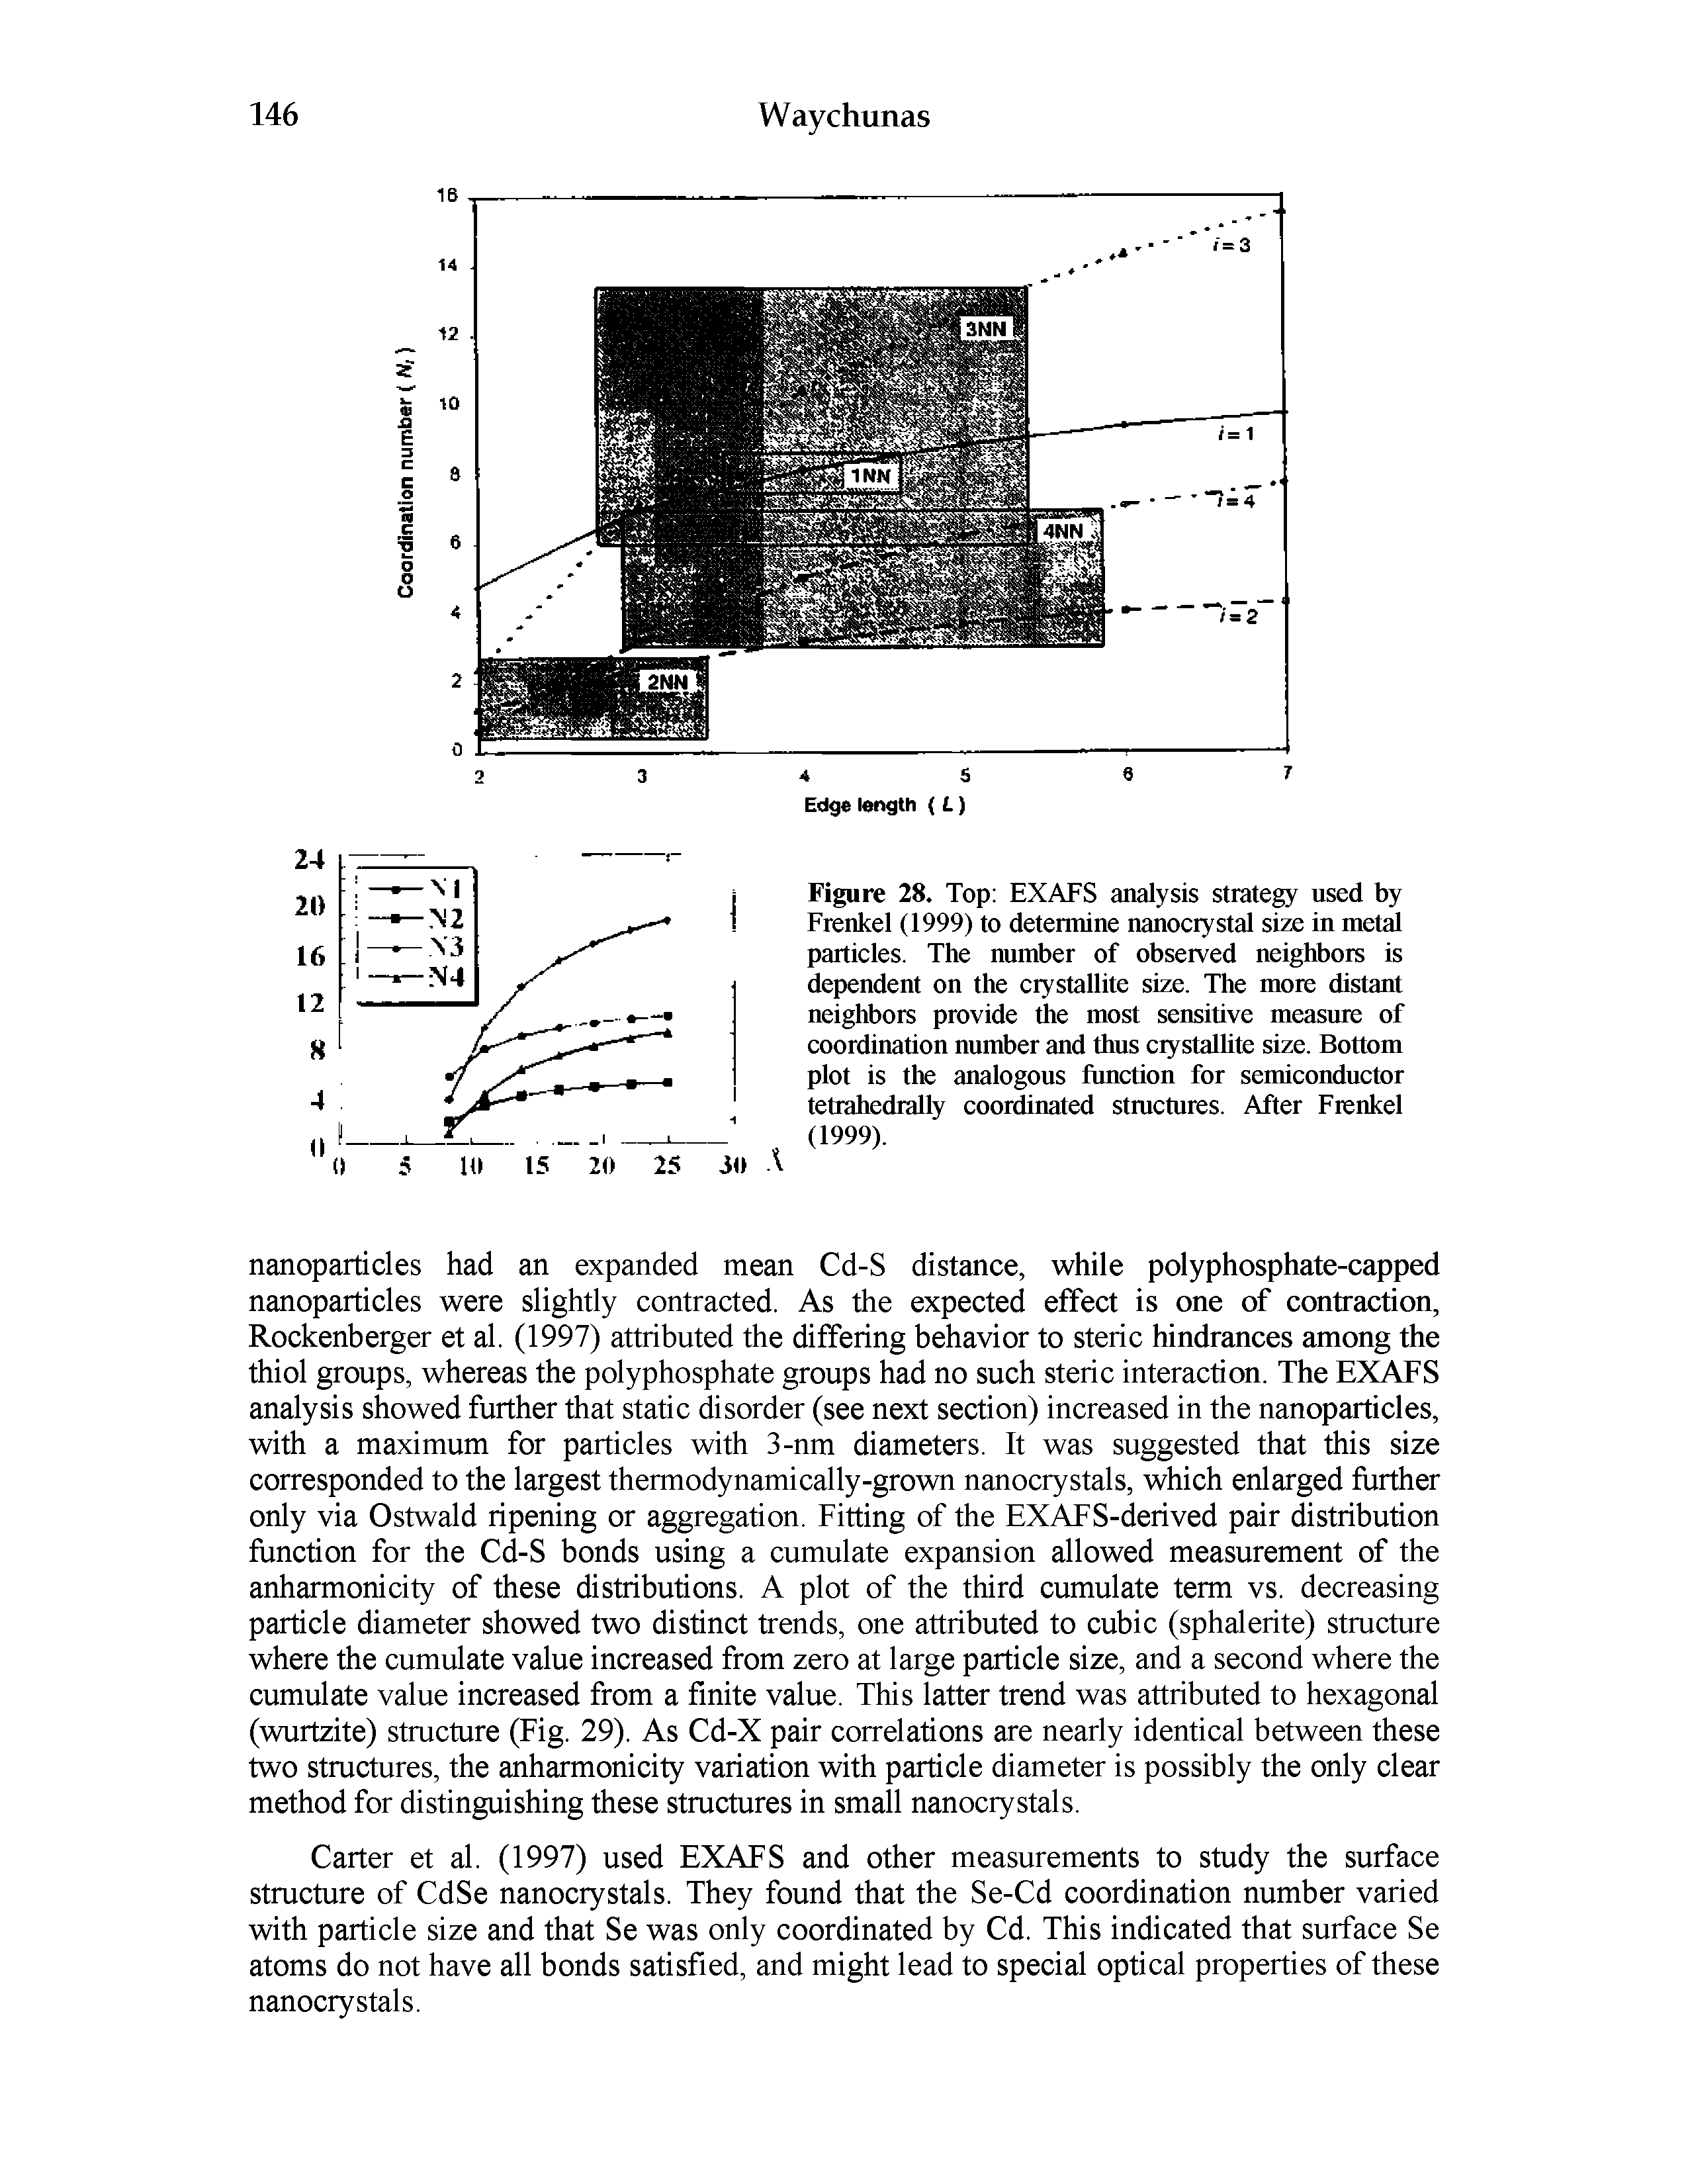 Figure 28. Top EXAFS analysis strategy used by Frenkel (1999) to determine nanocrystal size in meM particles. The number of observed neighbors is dependent on the crystallite size. The more distant neighbors provide the most sensitive measure of coordination number and thus ciystalhte size. Bottom plot is the analogous function for semiconductor tetrahedrally coordinated stmctures. After Frenkel (1999).